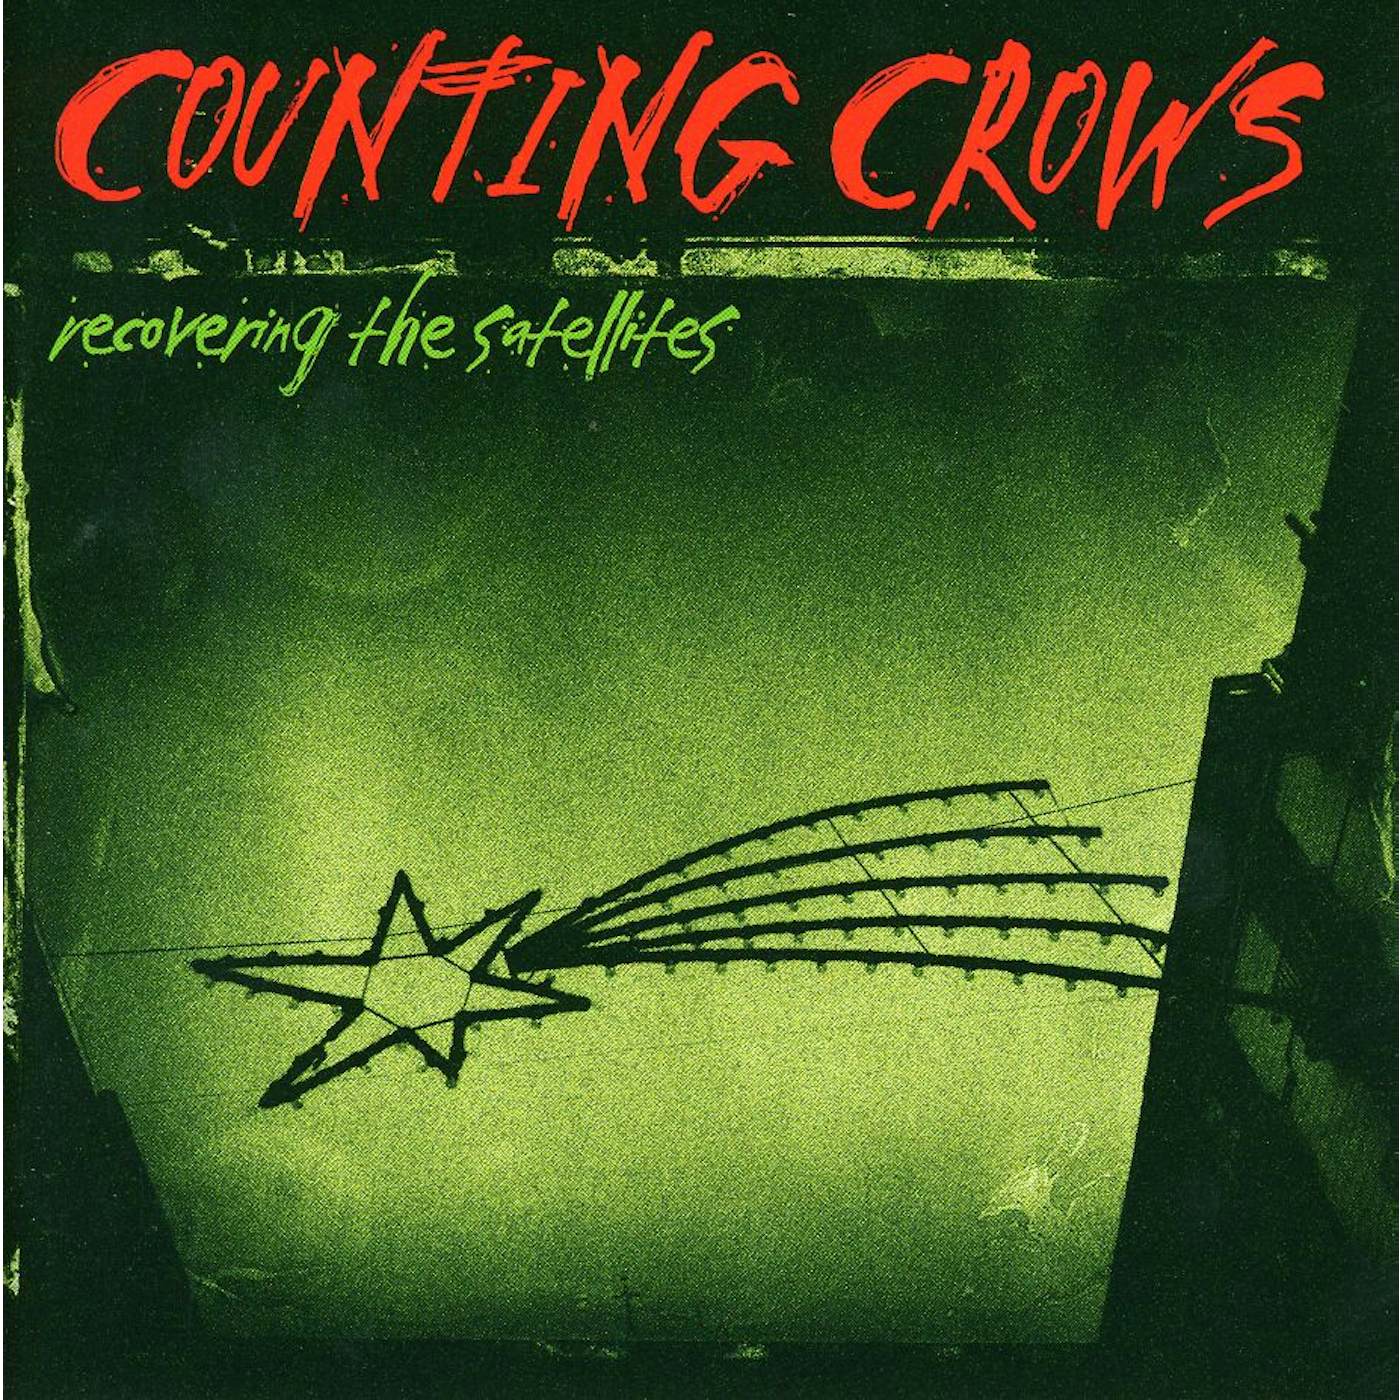 Counting Crows RECOVERING THE SATELLITES CD